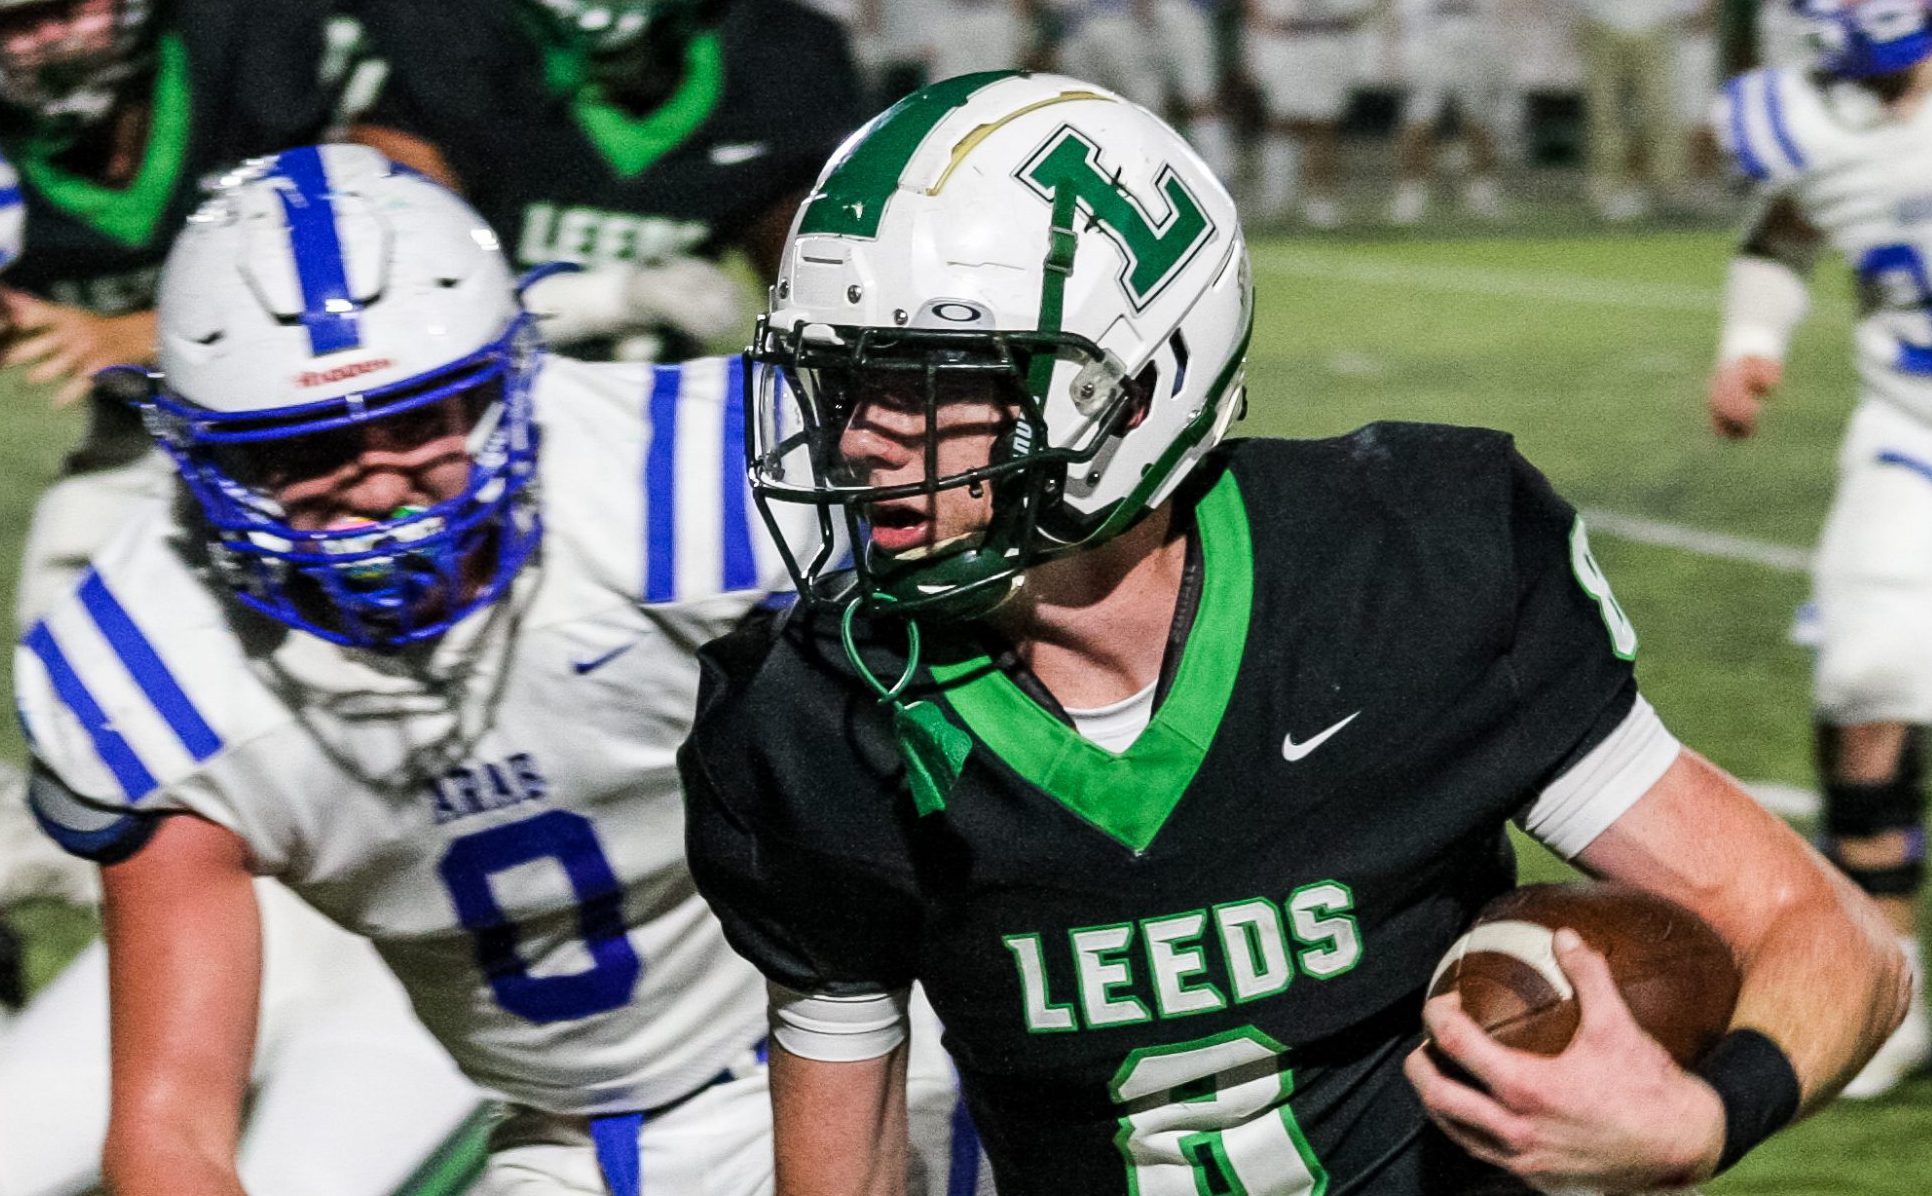 Leeds Rolls Into Round Two With 33-7 Win Over Arab